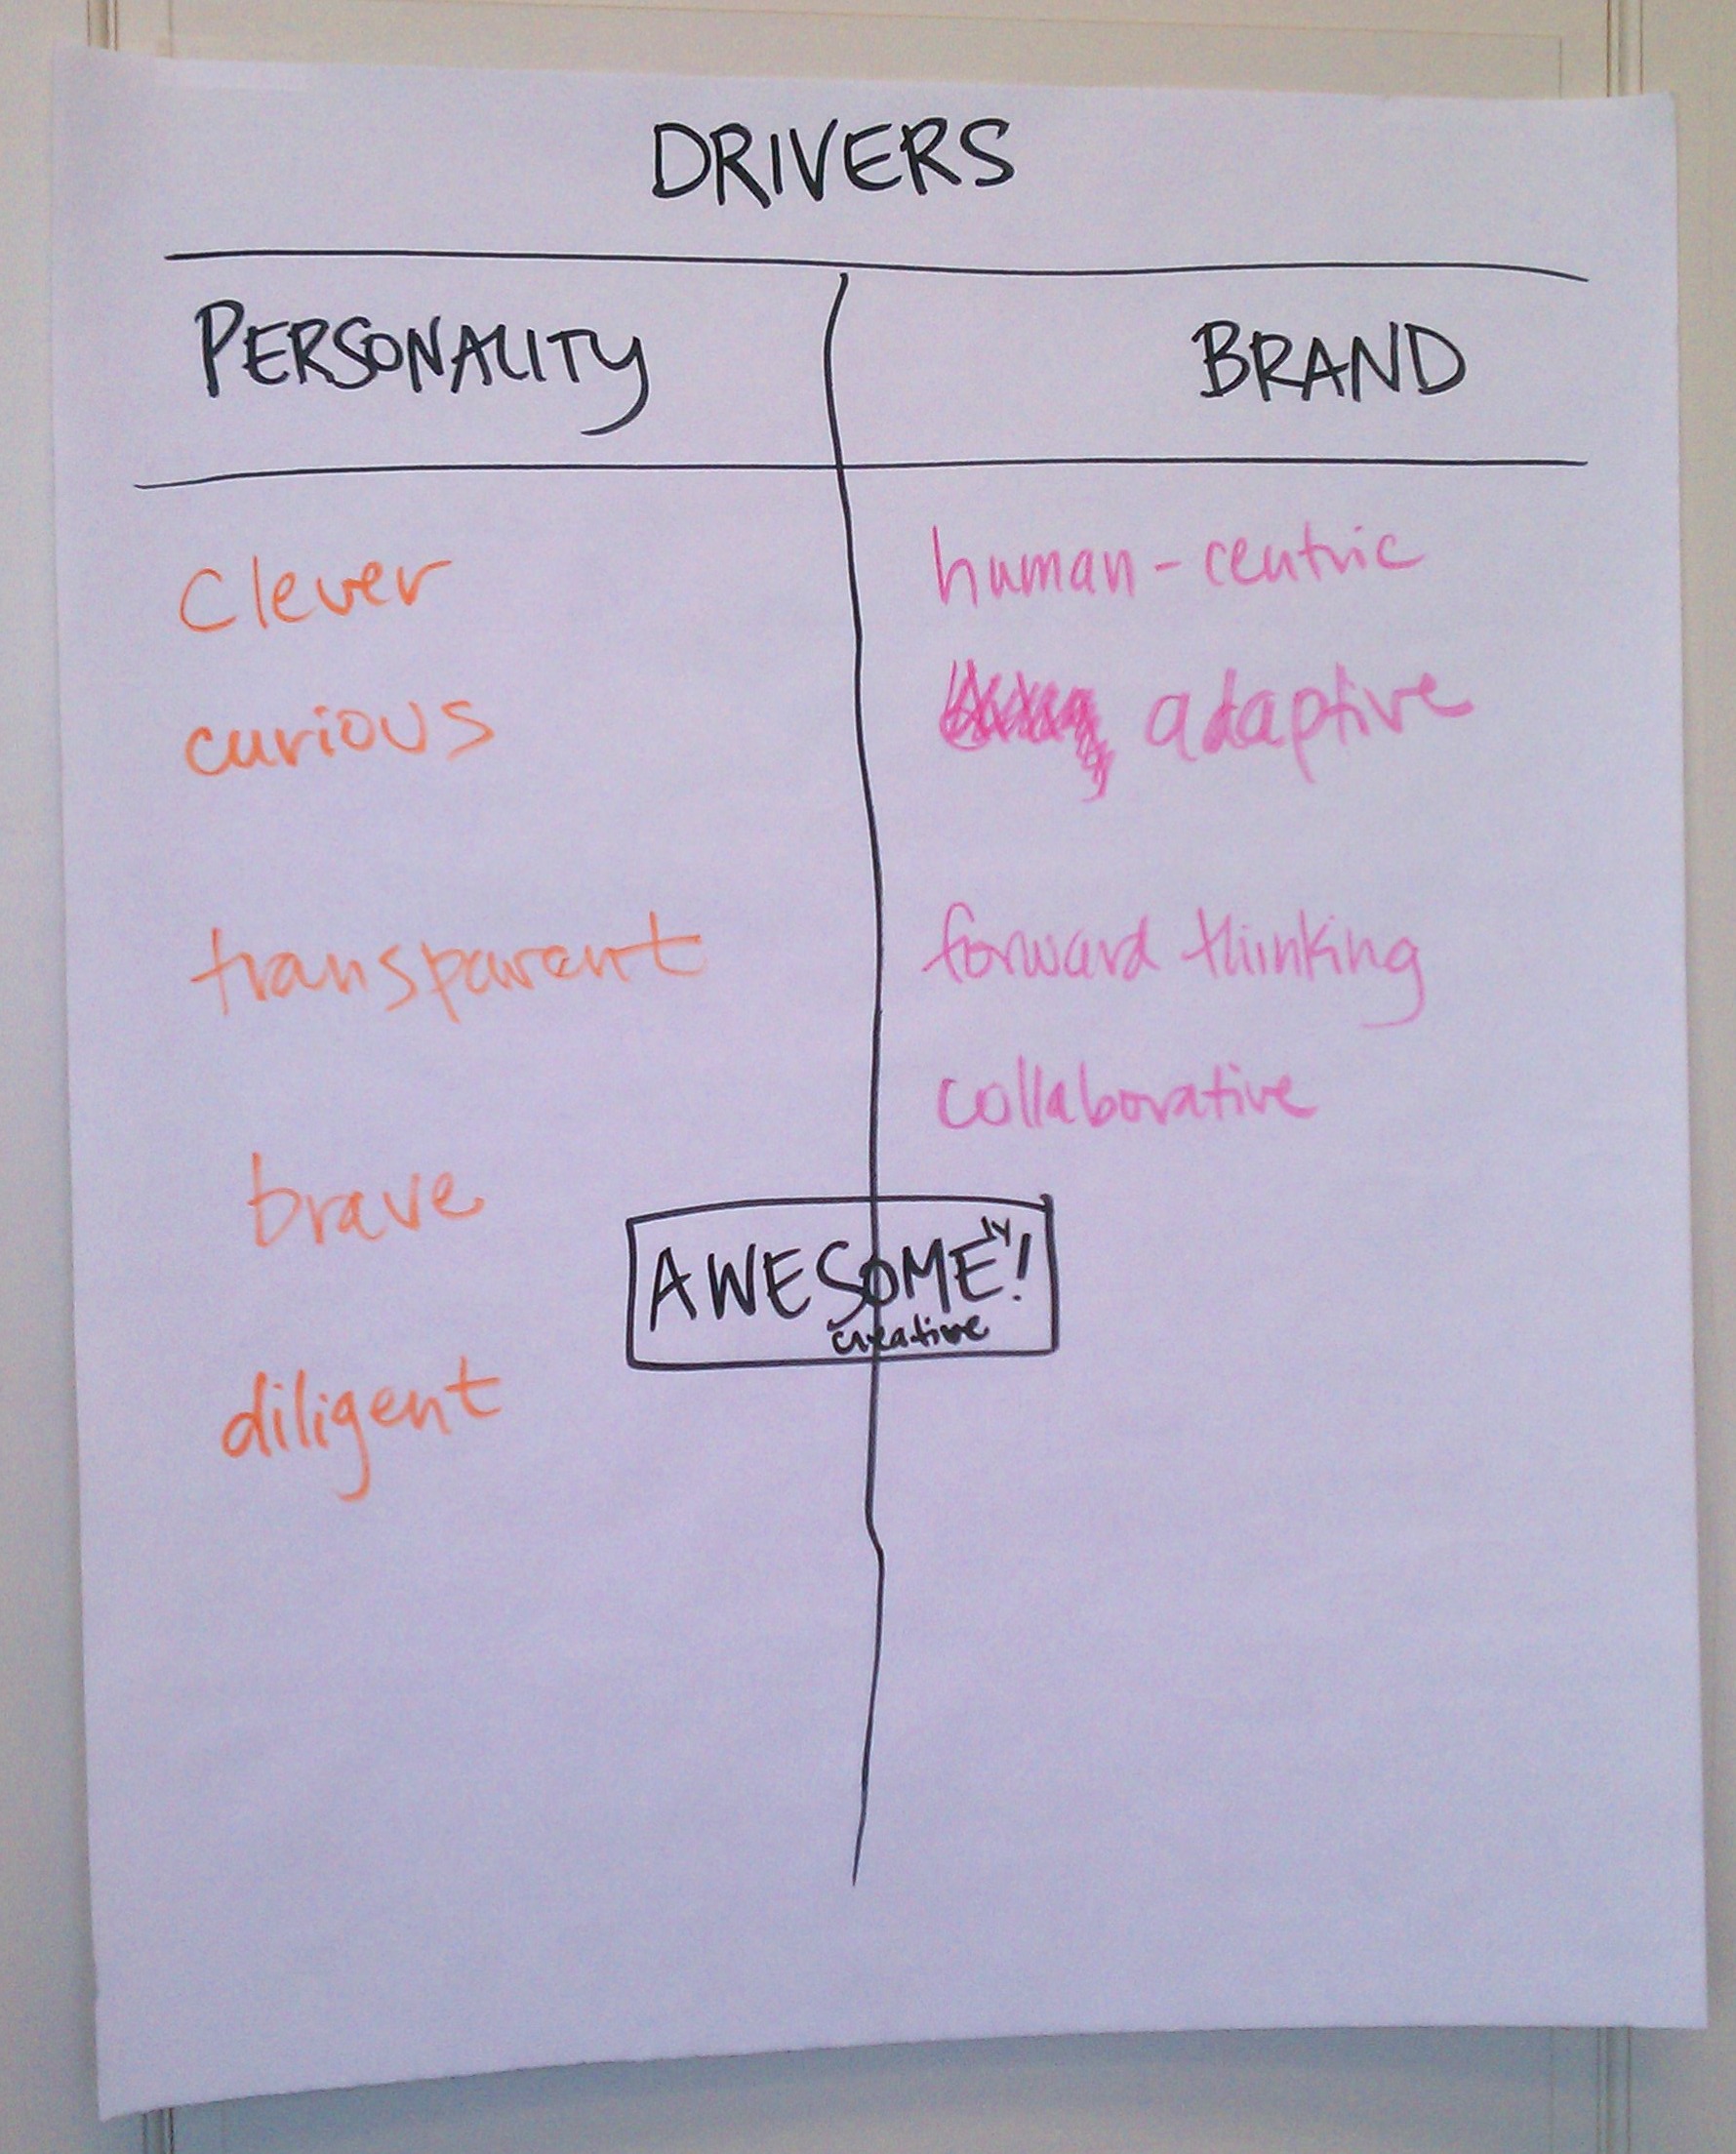 personality drivers for brand